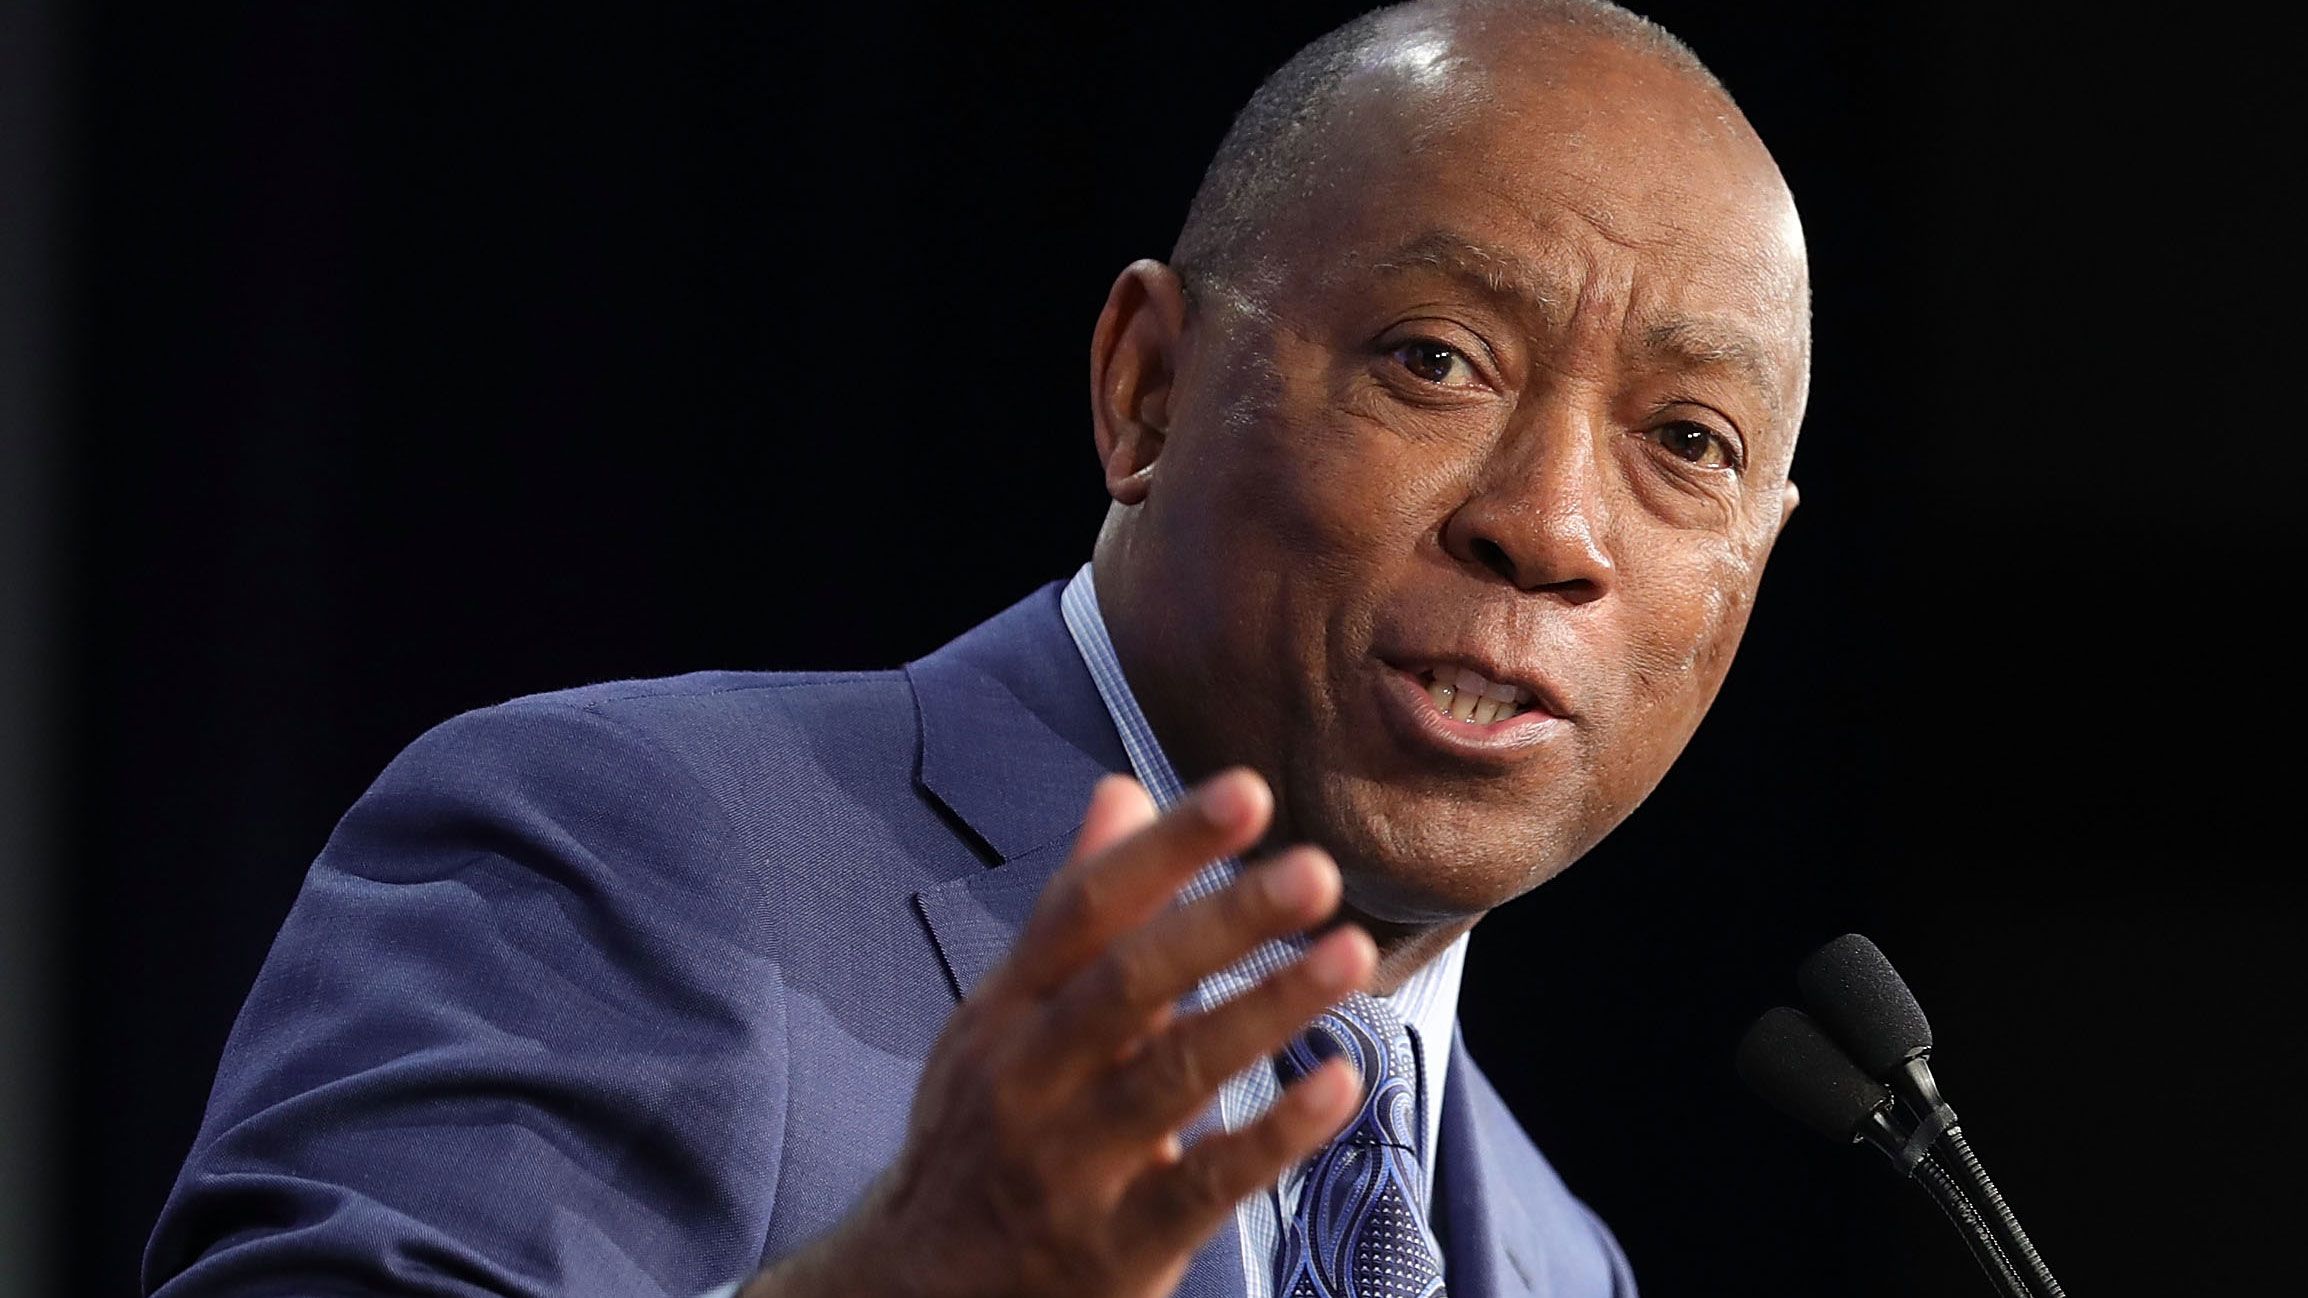 How Mayor Sylvester Turner plans to spend his last year